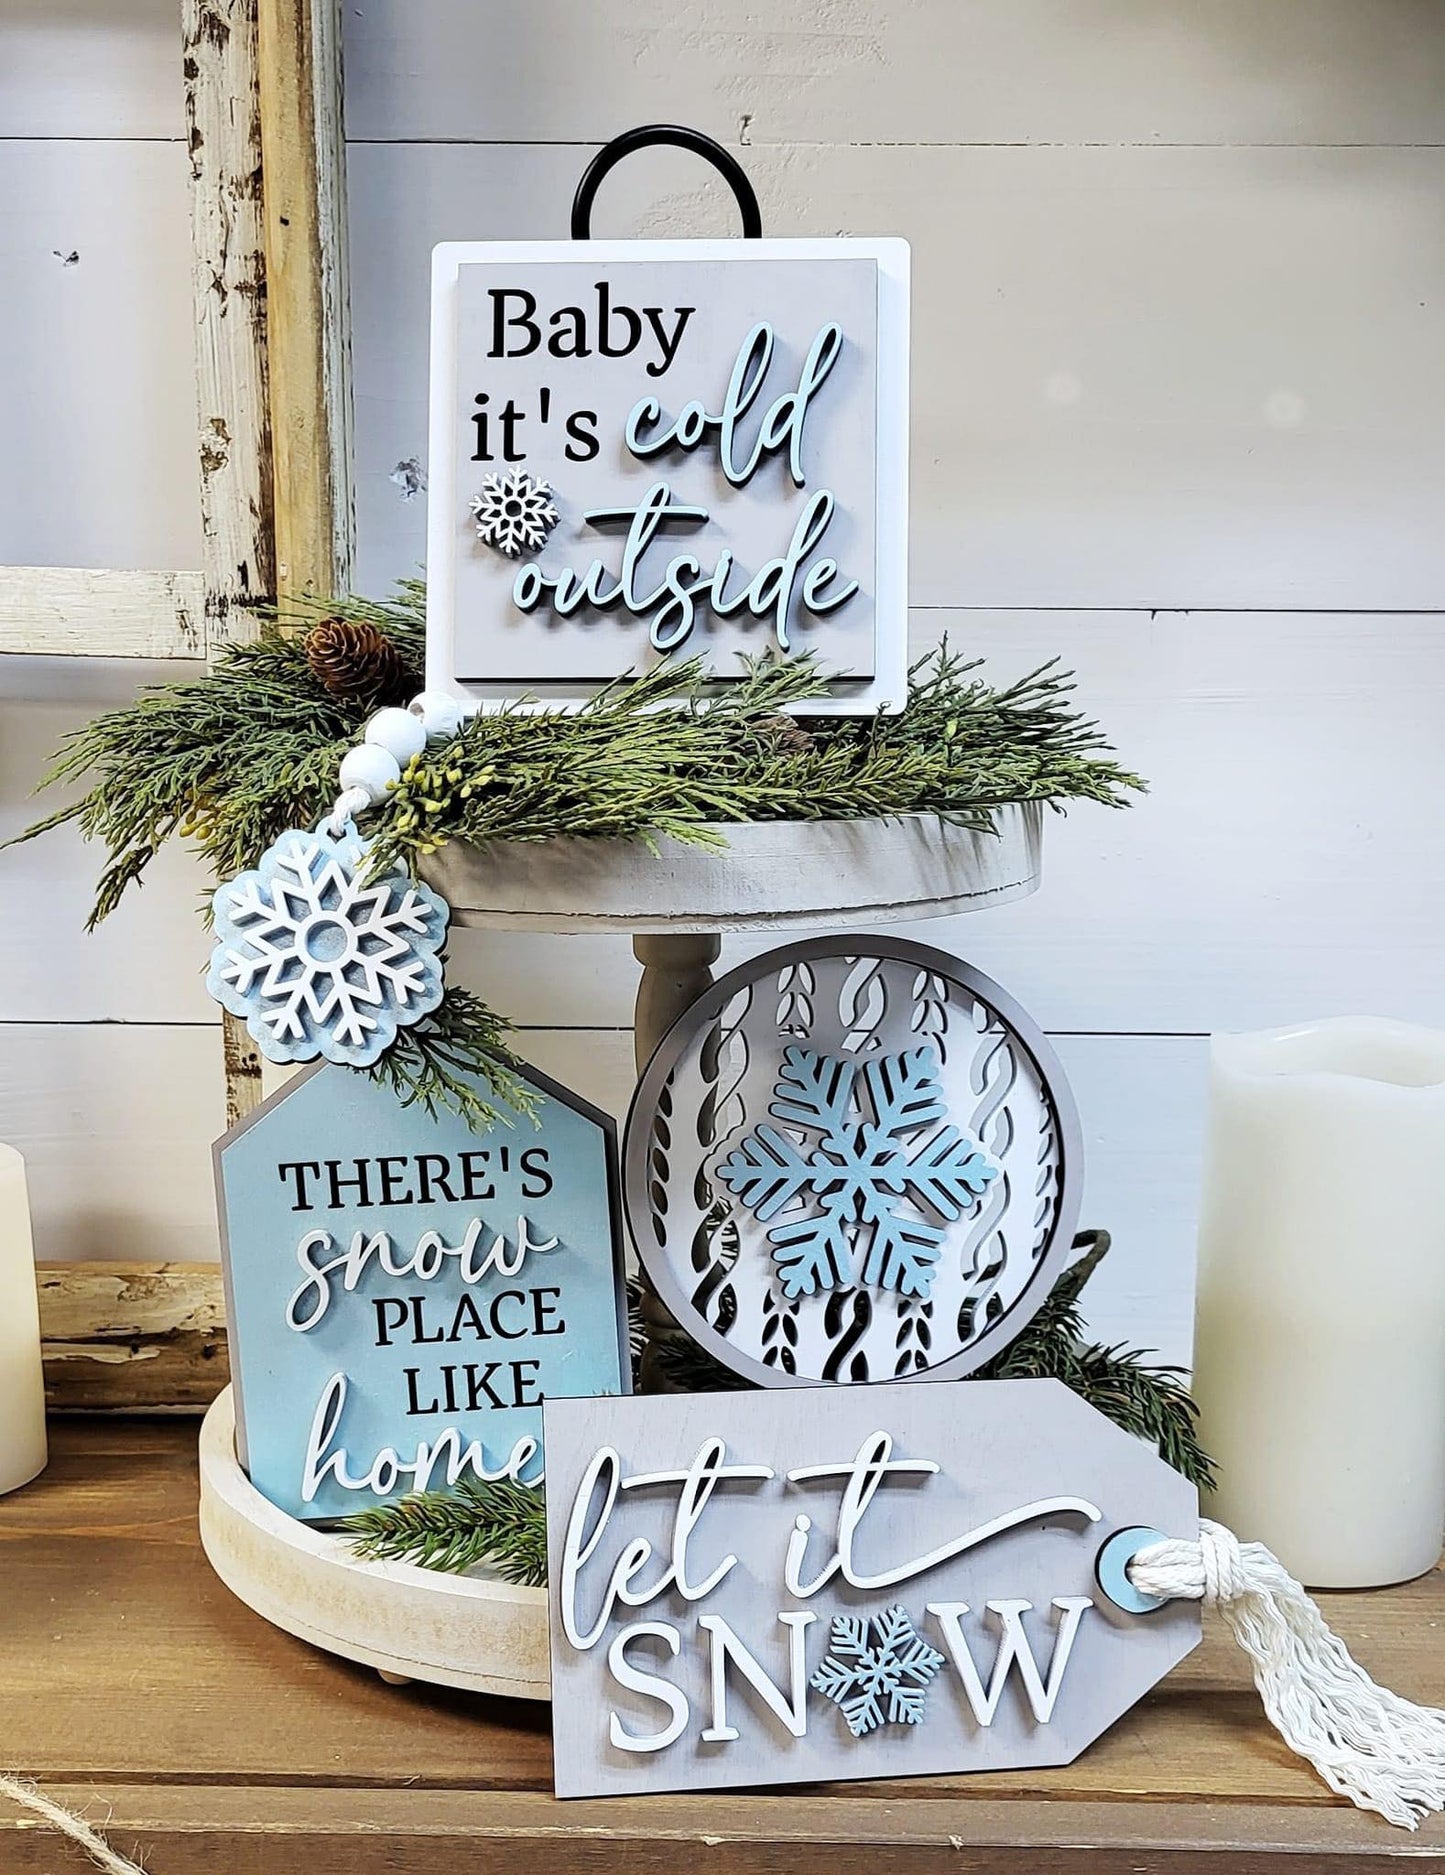 3D Tiered Tray Decor - Baby it's cold outside